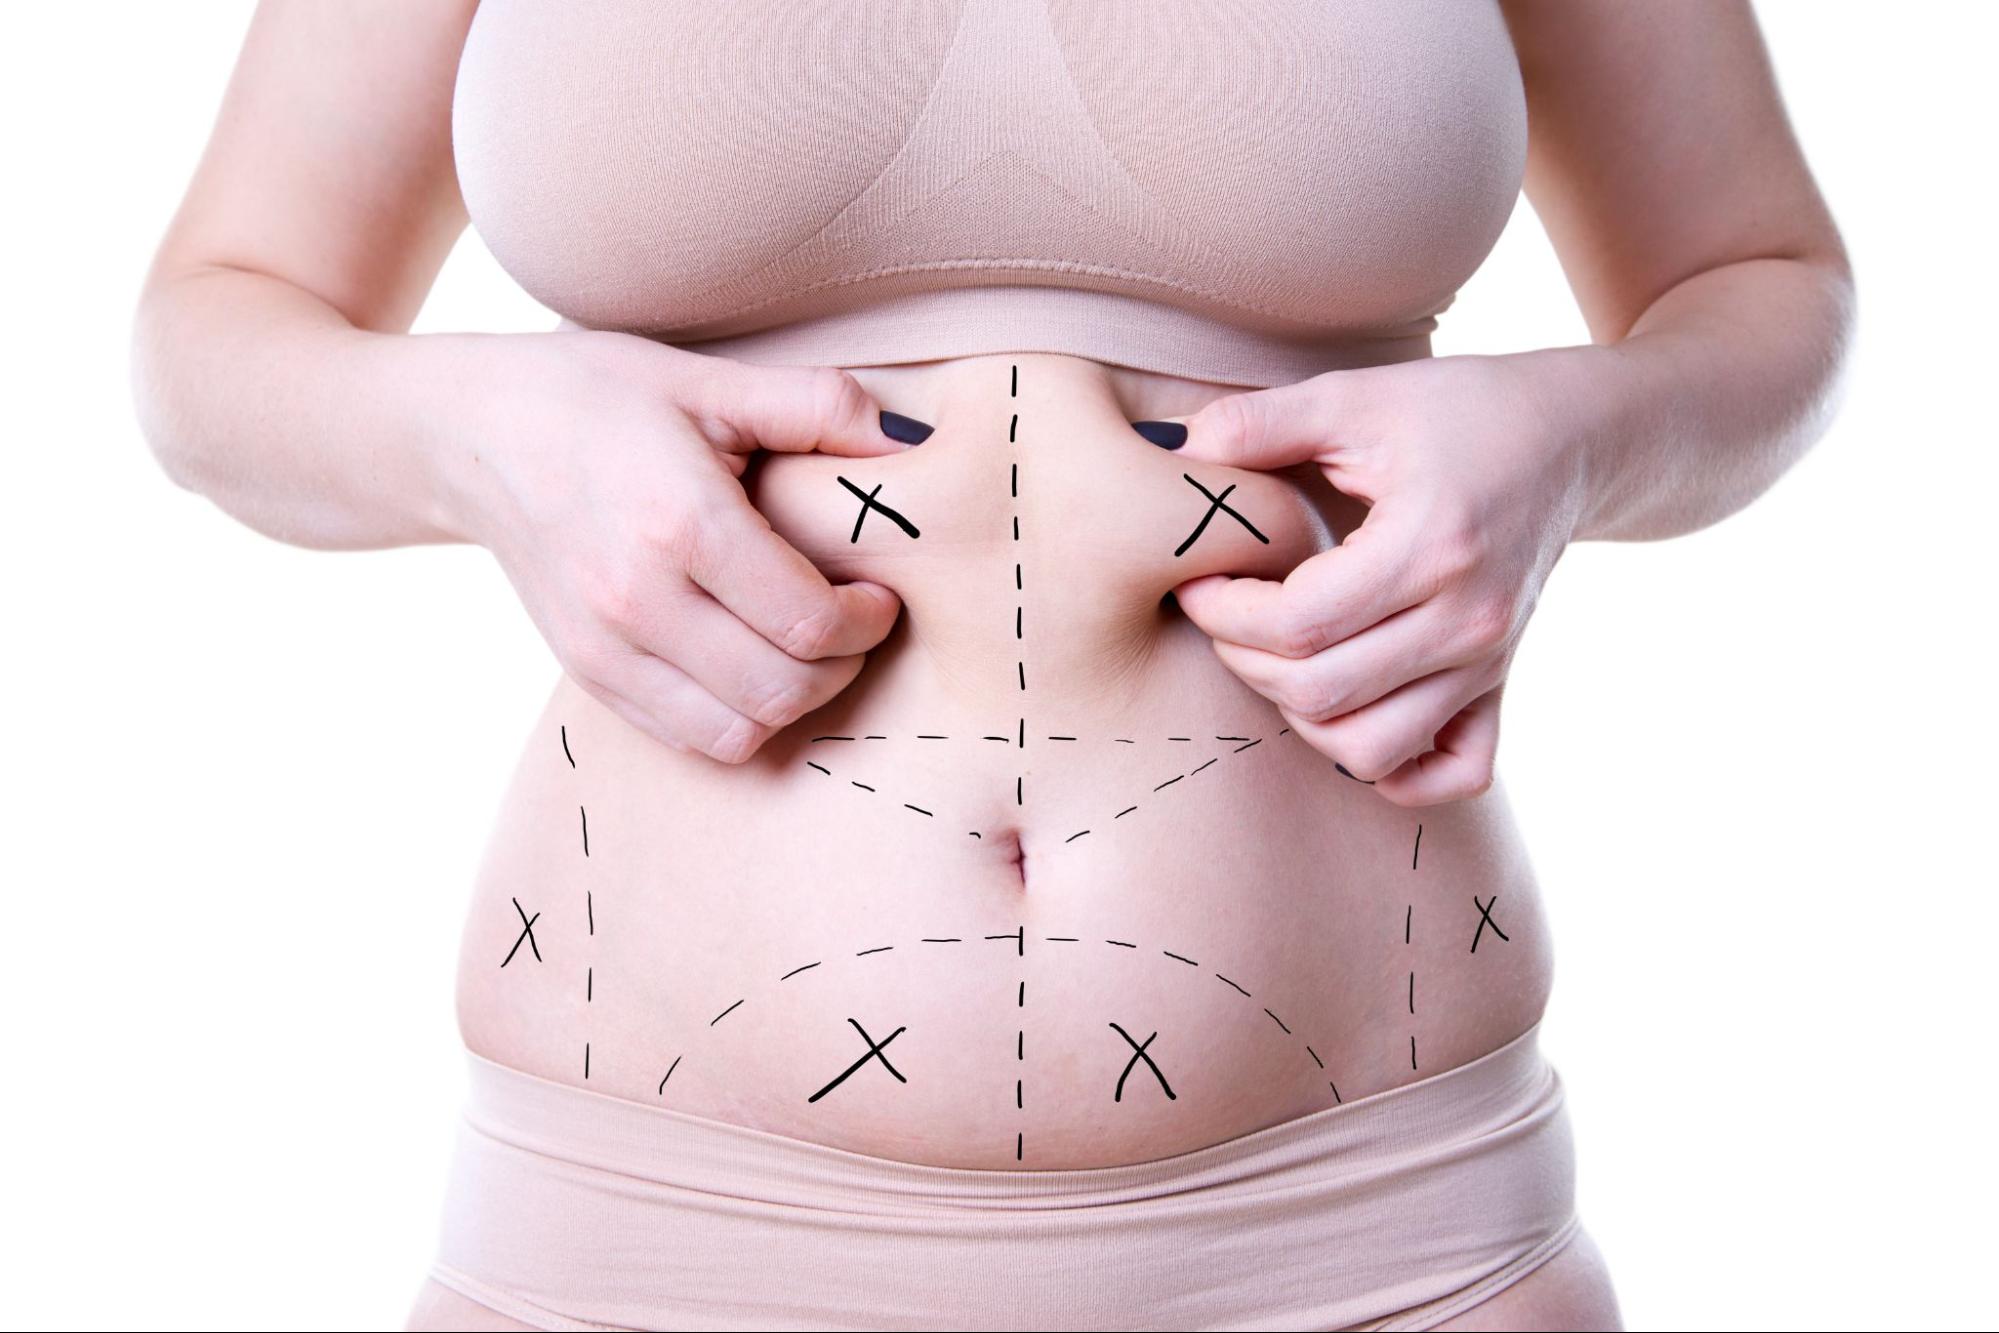 A Liposuction Procedure Promises 6-Pack Abs Without Lifting a Finger